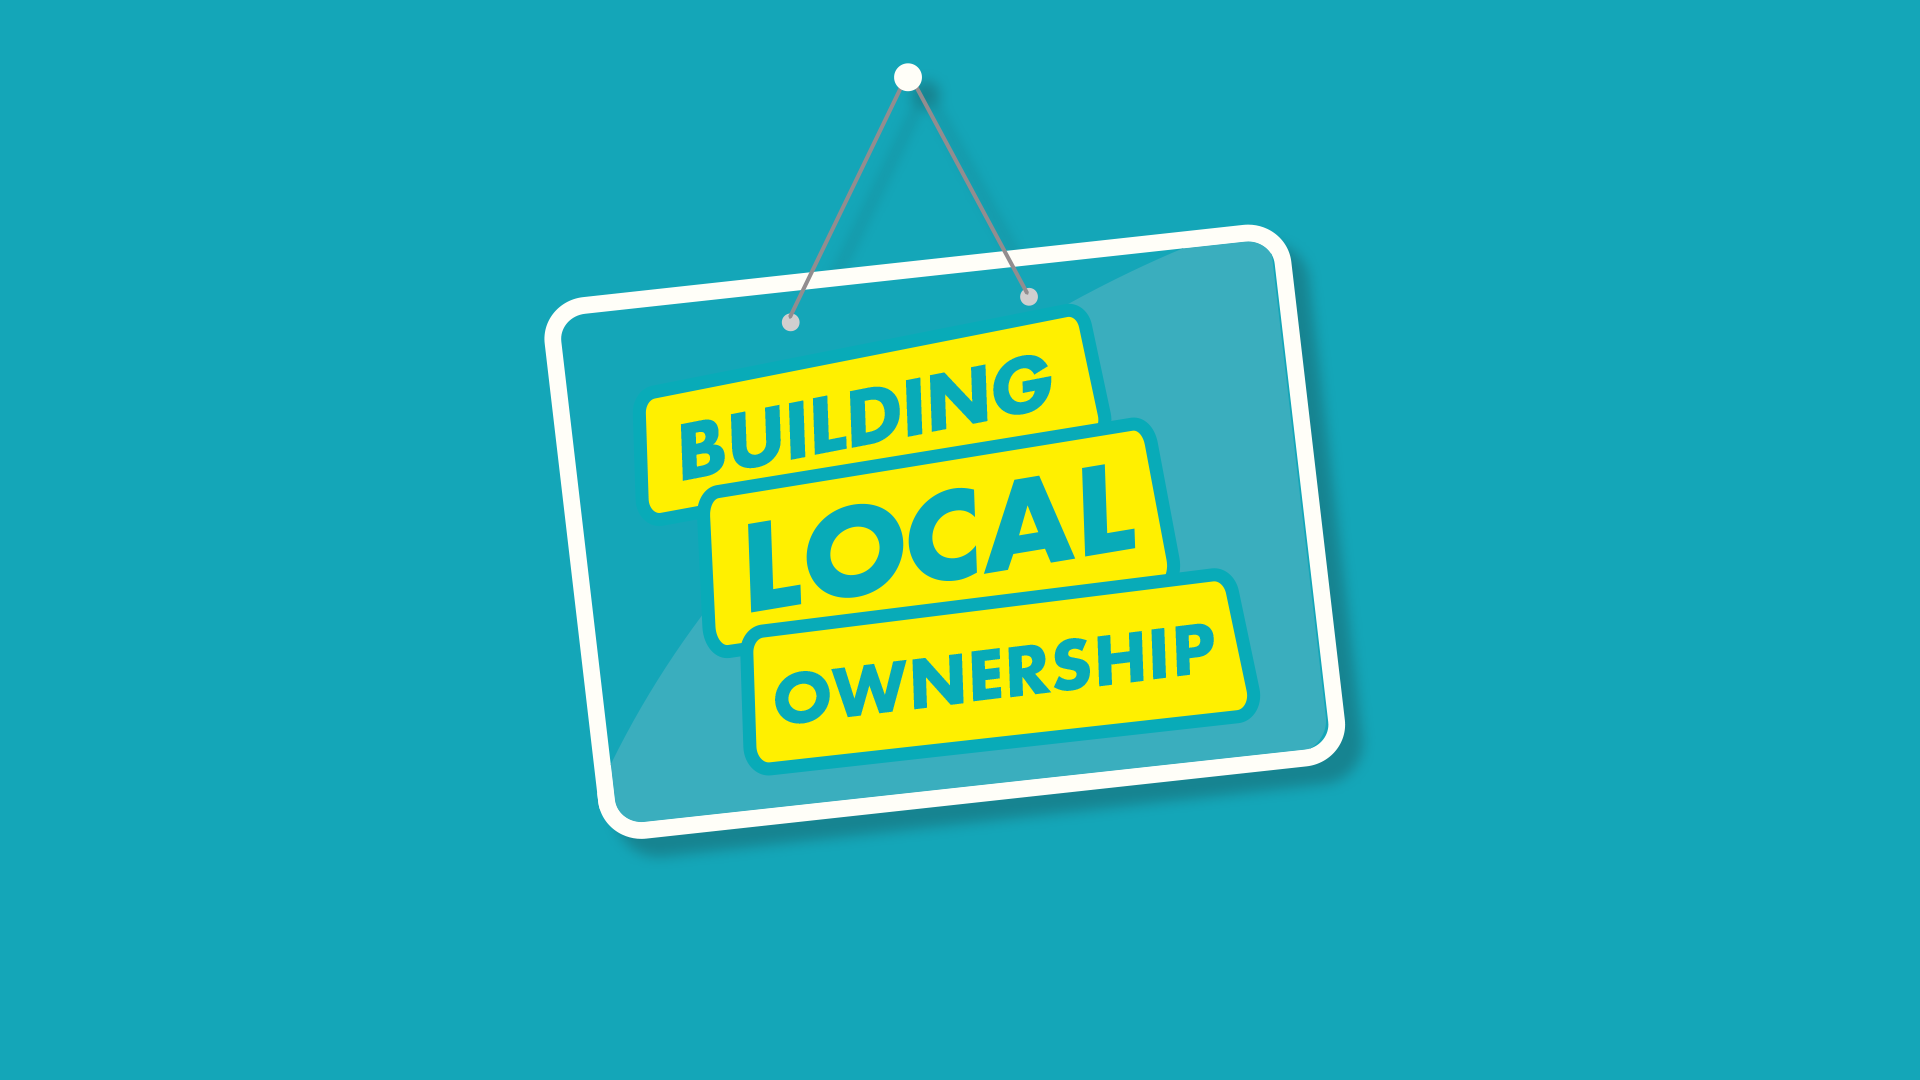 Building Local Ownership